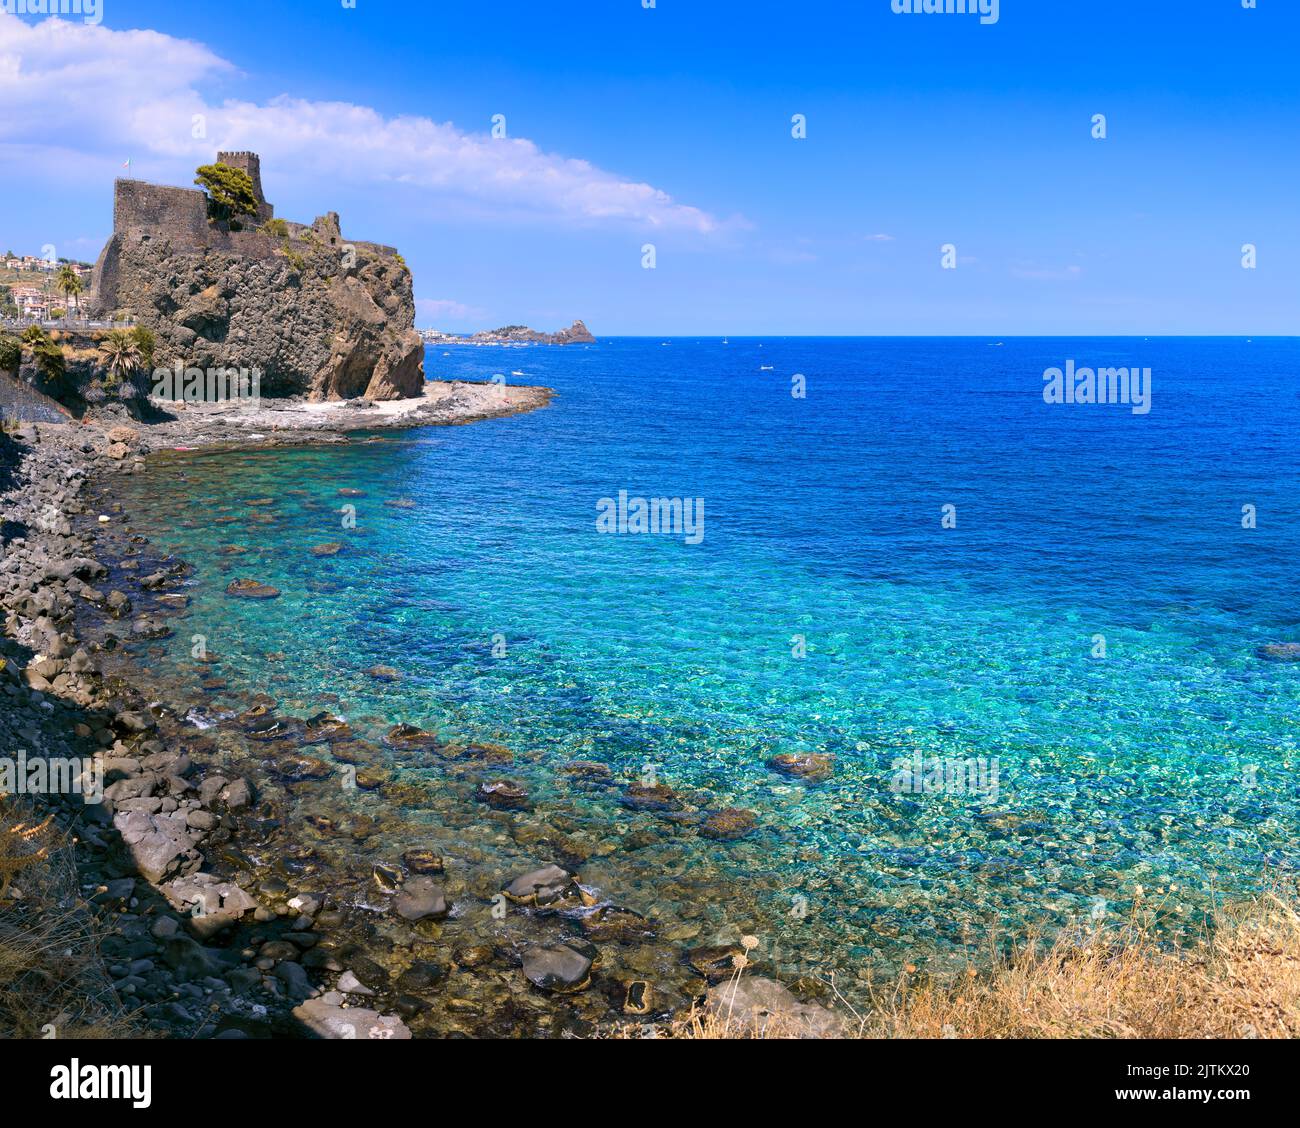 Norman old medieval Castle Aci Castello with stone walls on rock coast of Ionian Sea near Catania in Sicily, Southern Italy. Stock Photo